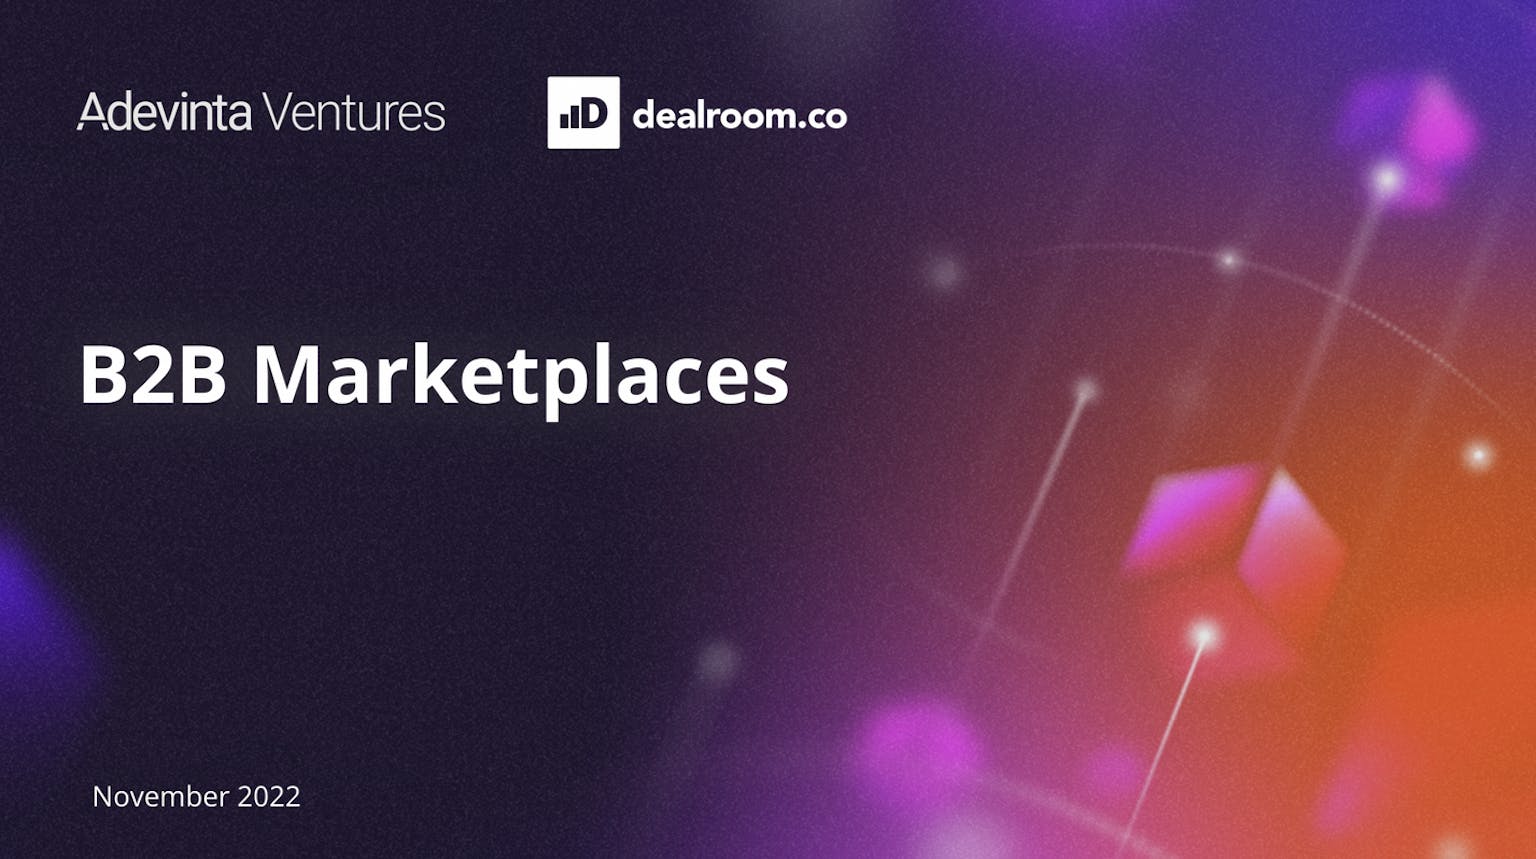 has been recognized as the B2B Marketplace Platform of the Year